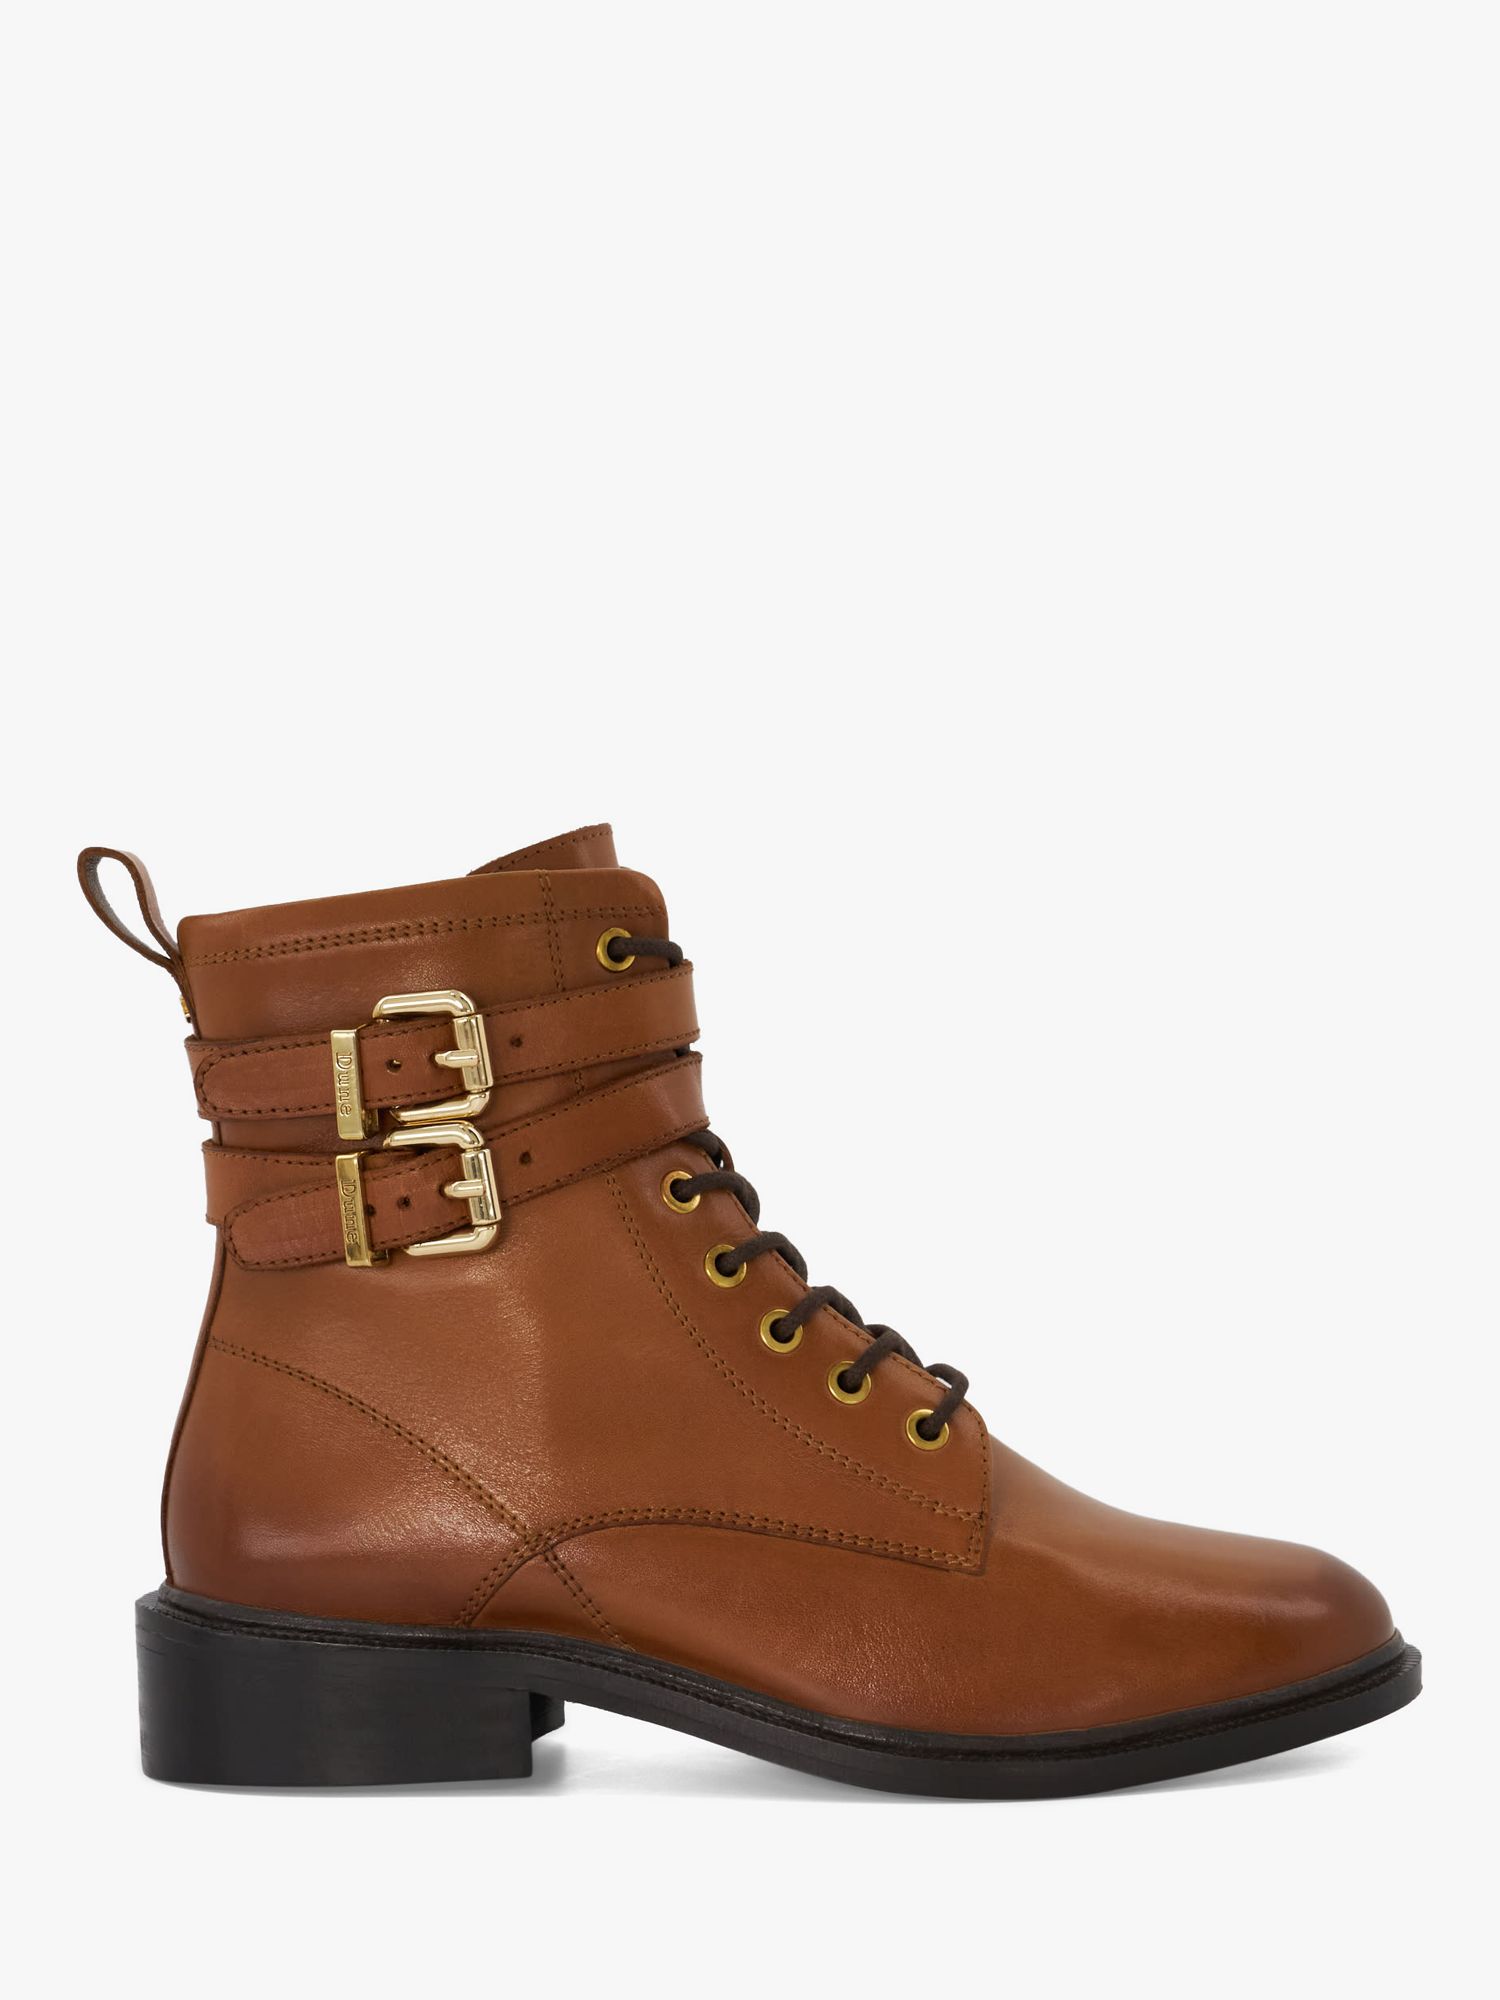 Dune Phyllis Leather Double Buckle Lace Up Boots, Tan at John Lewis ...